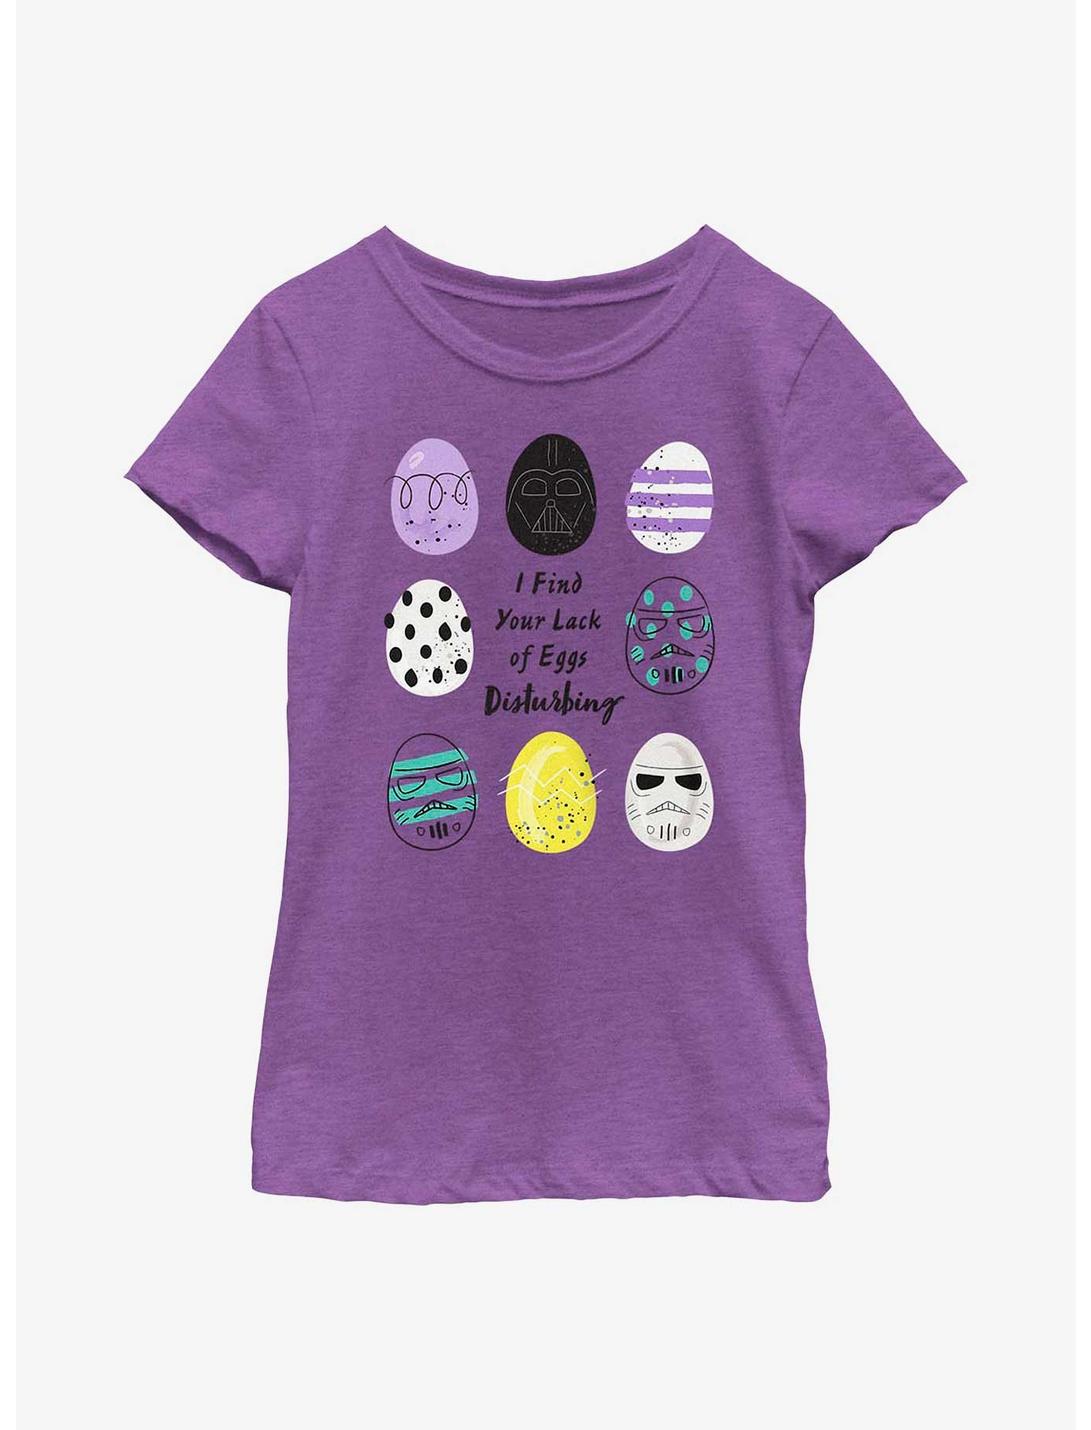 Star Wars Lack of Easter Eggs Disturbing Youth Girls T-Shirt, PURPLE BERRY, hi-res